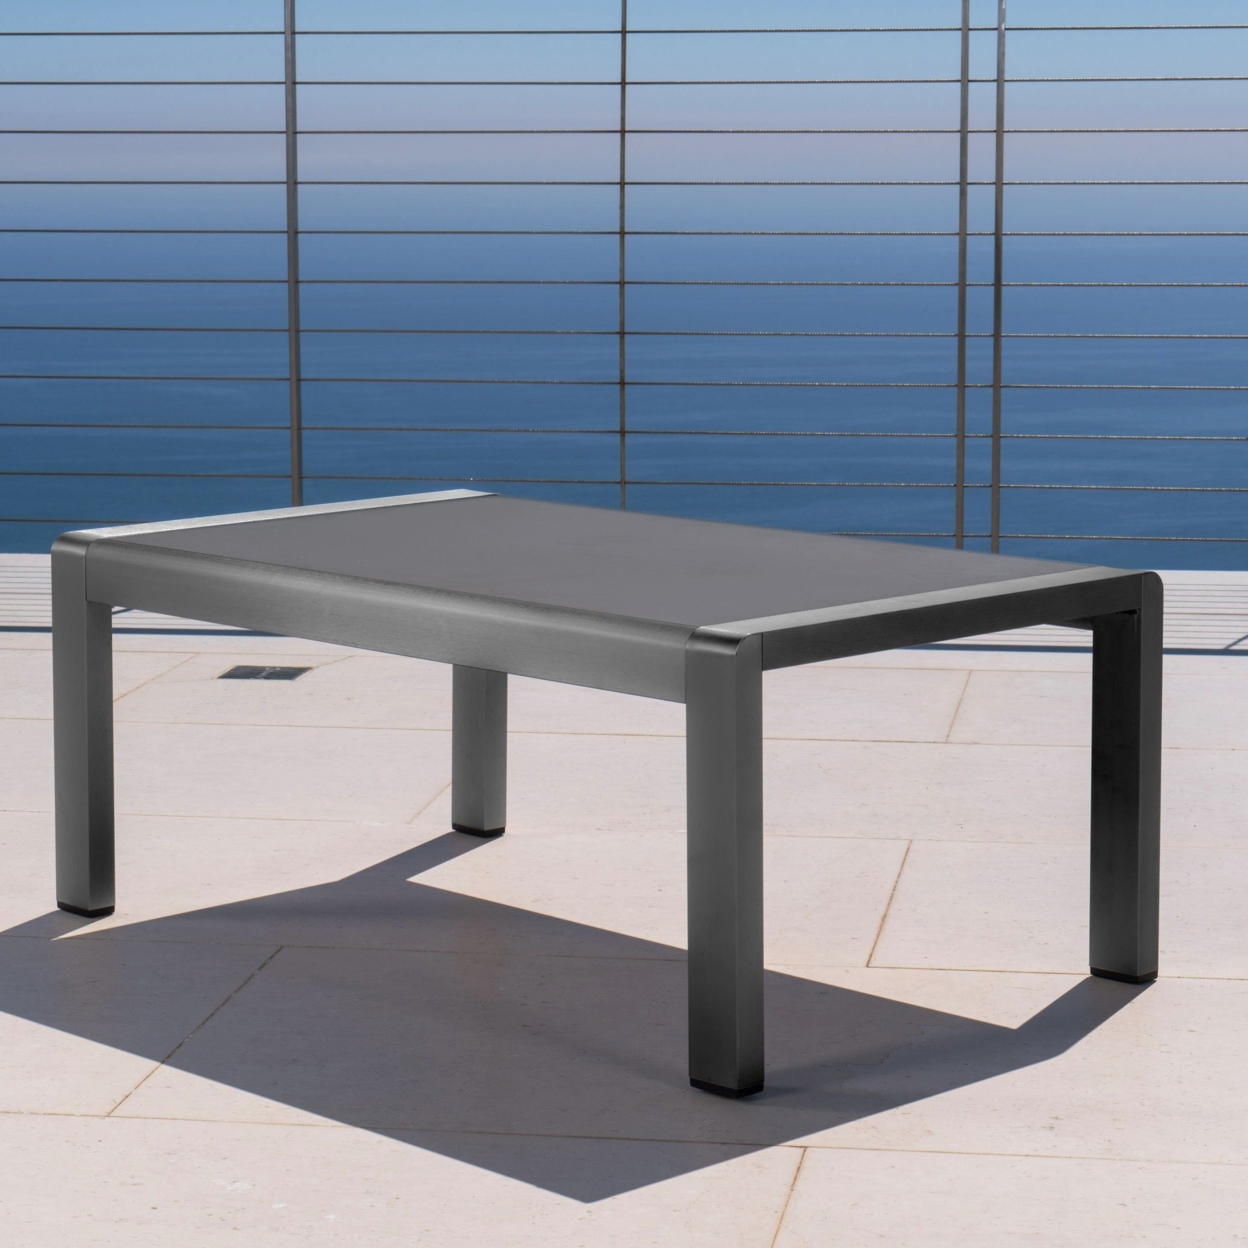 Crested Bay Outdoor Gray Aluminum Coffee Table With Tempered Glass Table Top